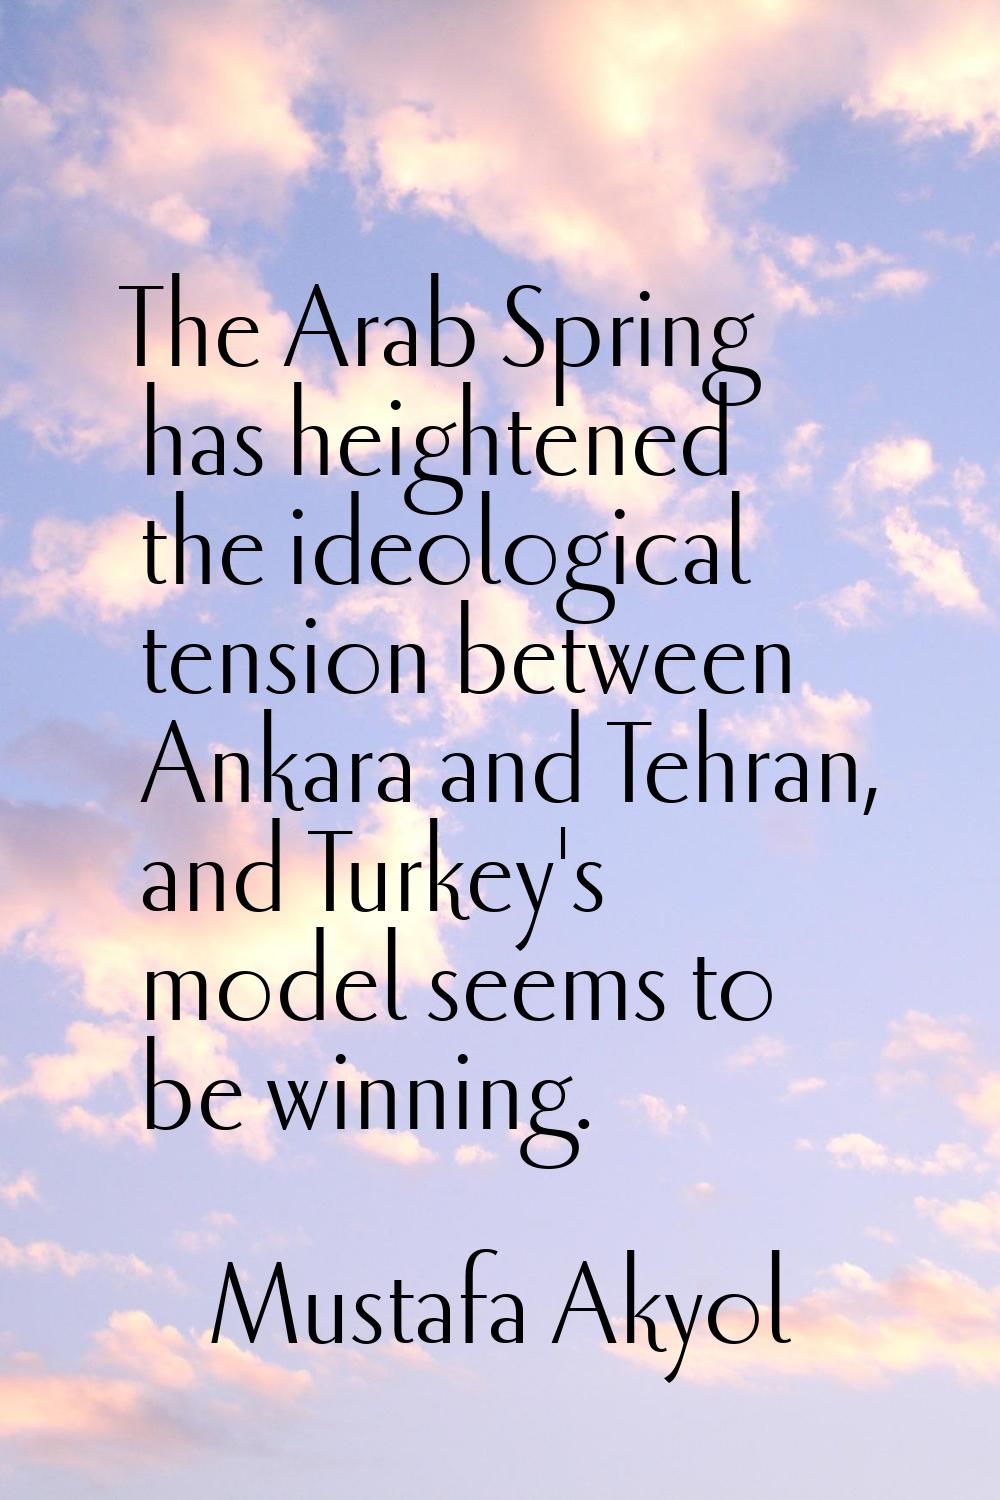 The Arab Spring has heightened the ideological tension between Ankara and Tehran, and Turkey's mode